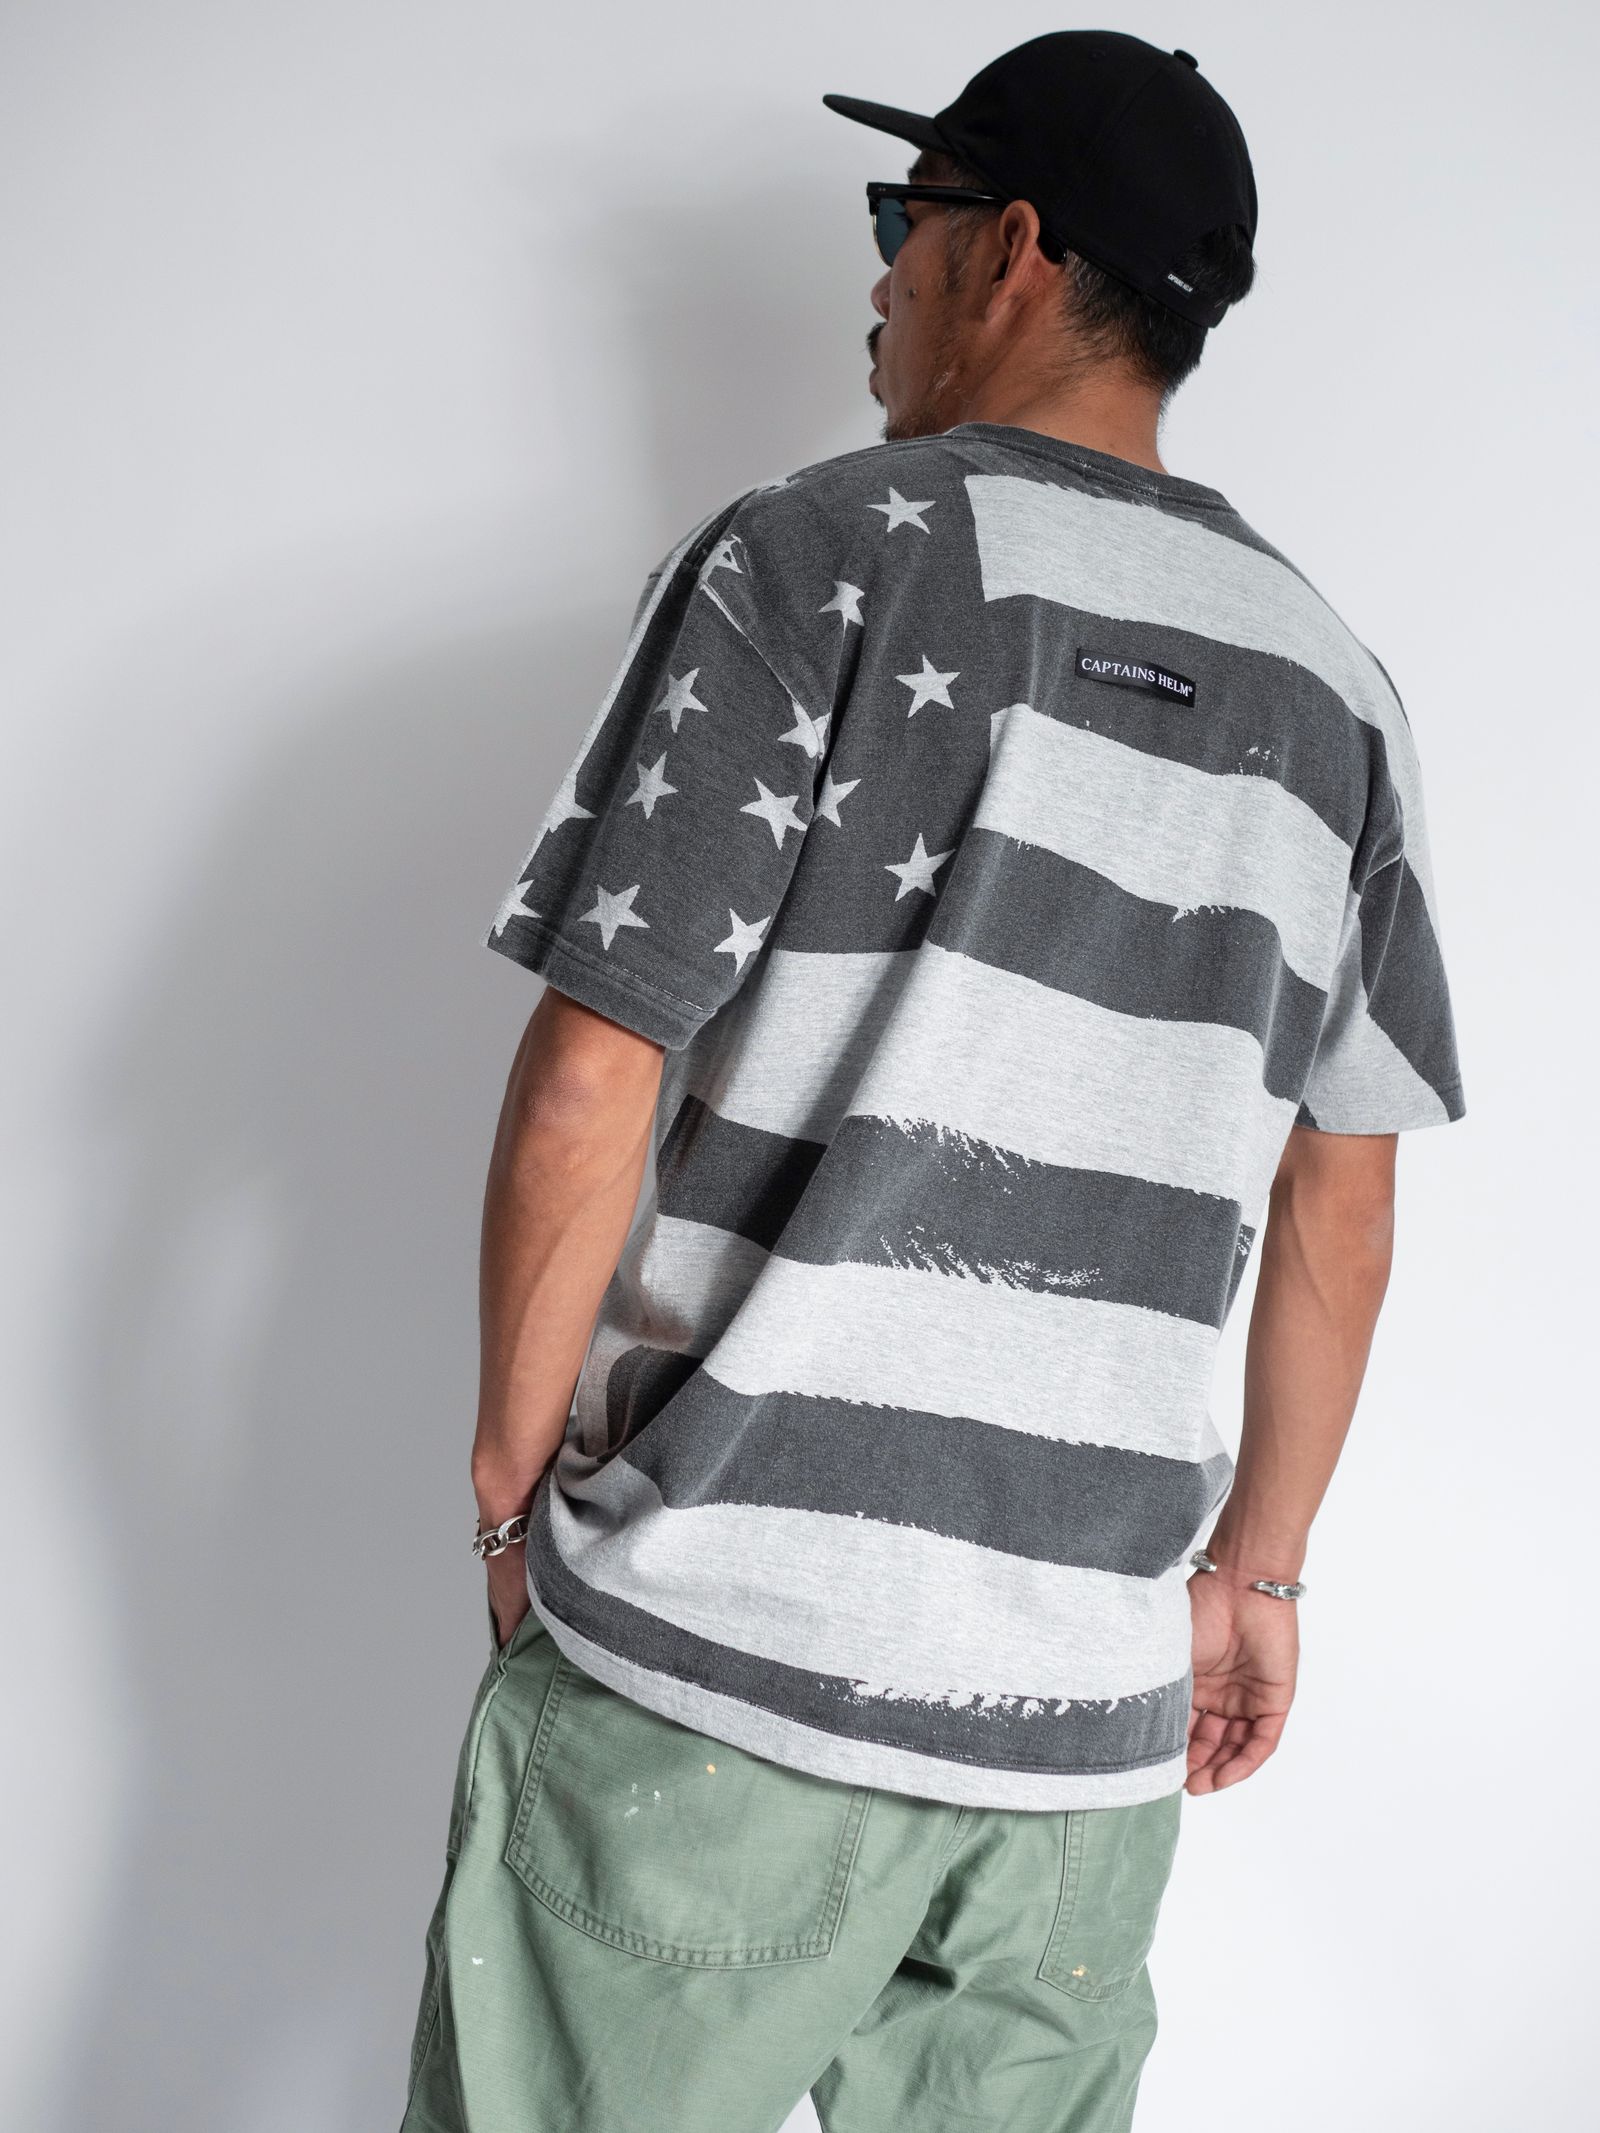 CAPTAINS HELM - AOP FLAG TEE (GRAY) / アメリカンフラッグ バック